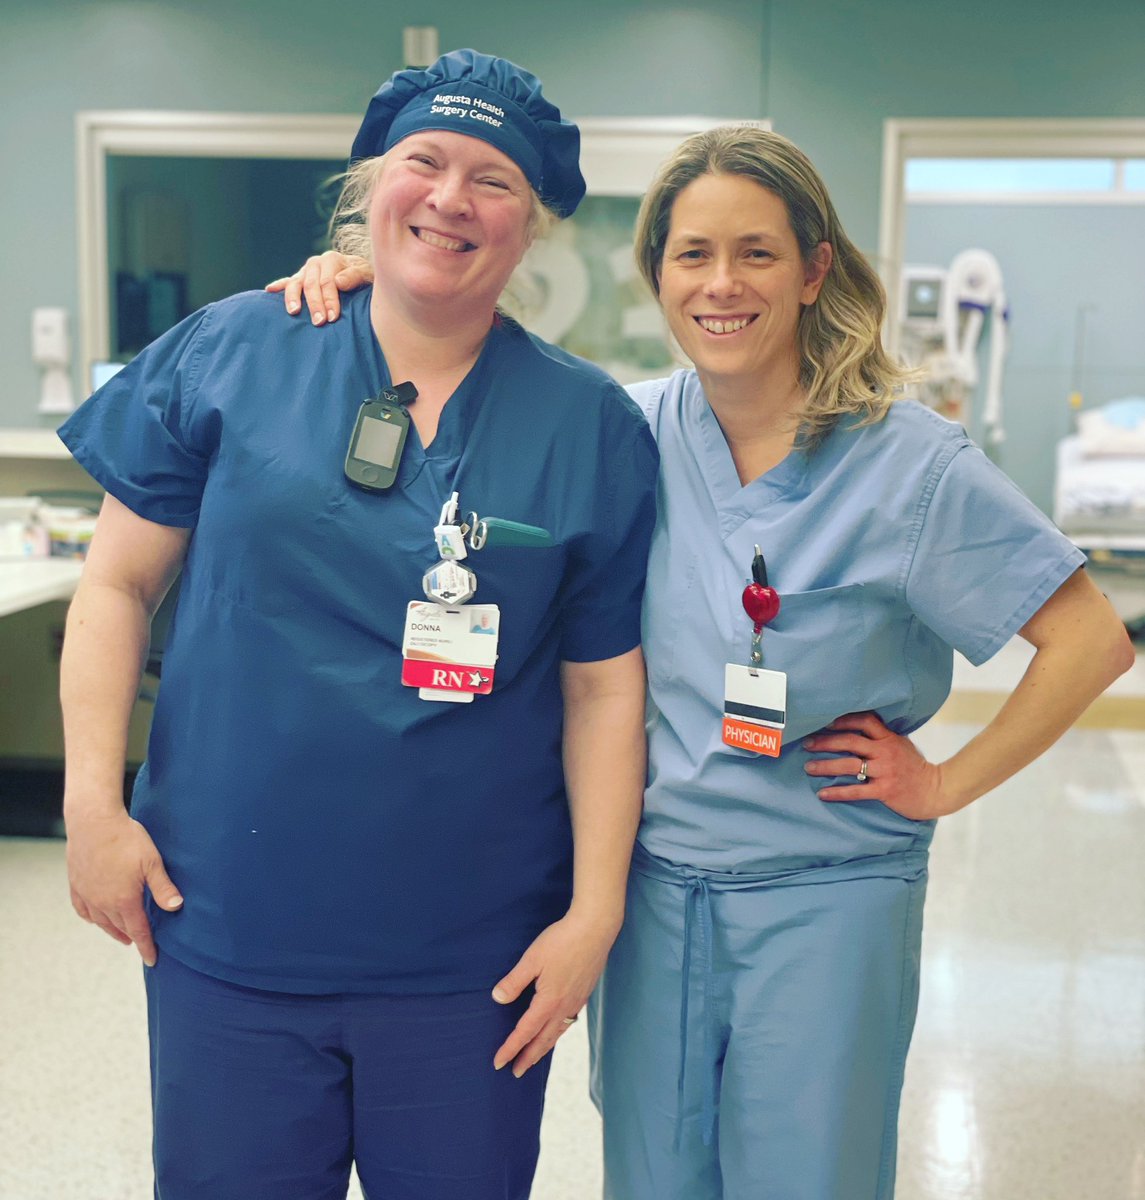 We #DressInBlueDay on most days 
But especially today💙💙
With superstar nursing colleague Donna 
For #ColonCancerAwareness
@AugustaHealthVA 
#gitwitter #45isTheNew50